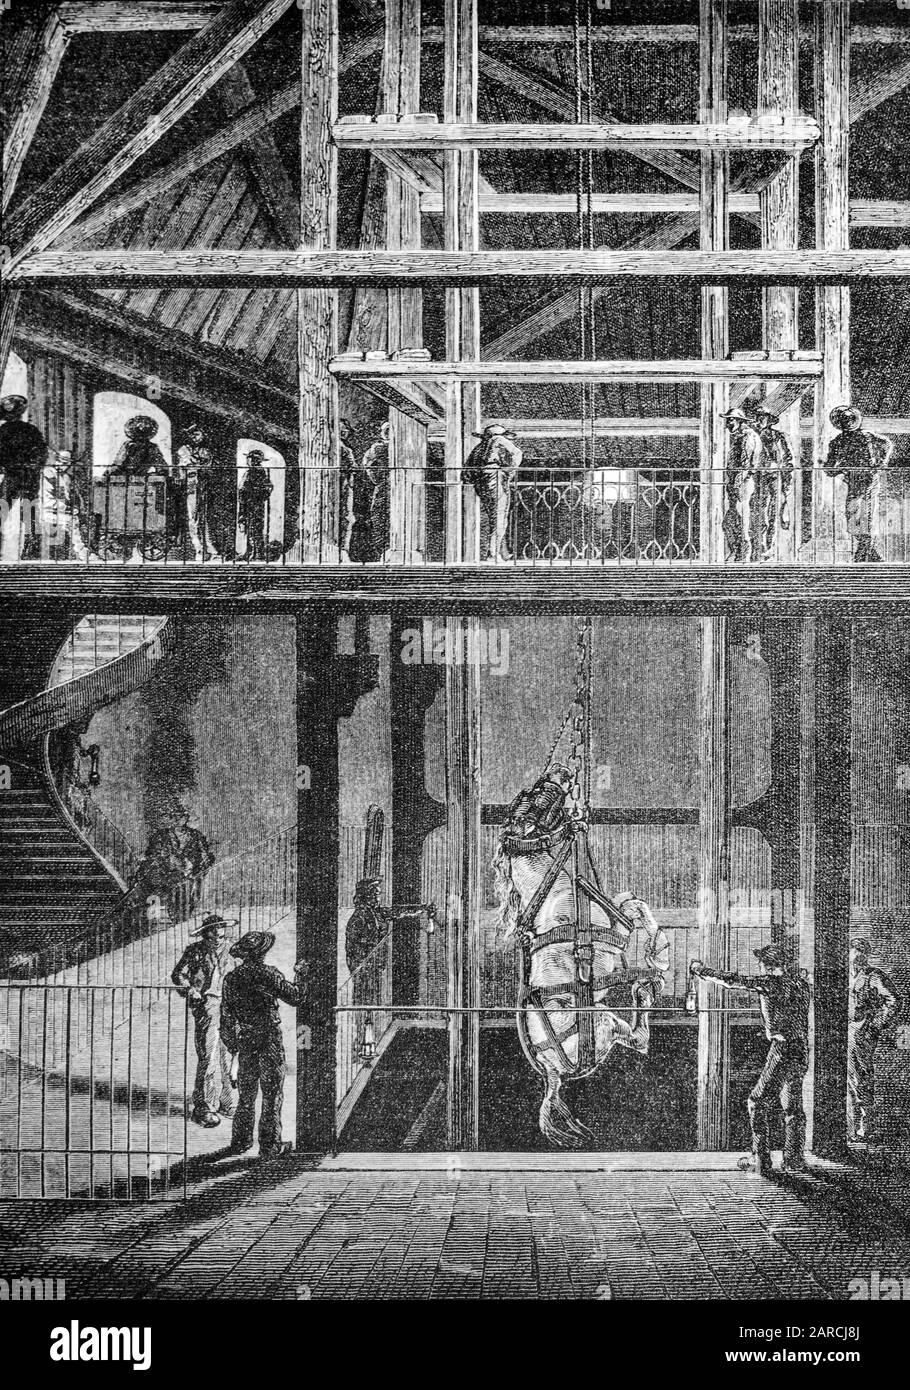 19th century illustration of a pit pony / mining horse strapped in a harness and being lowered down a coal mine shaft Stock Photo